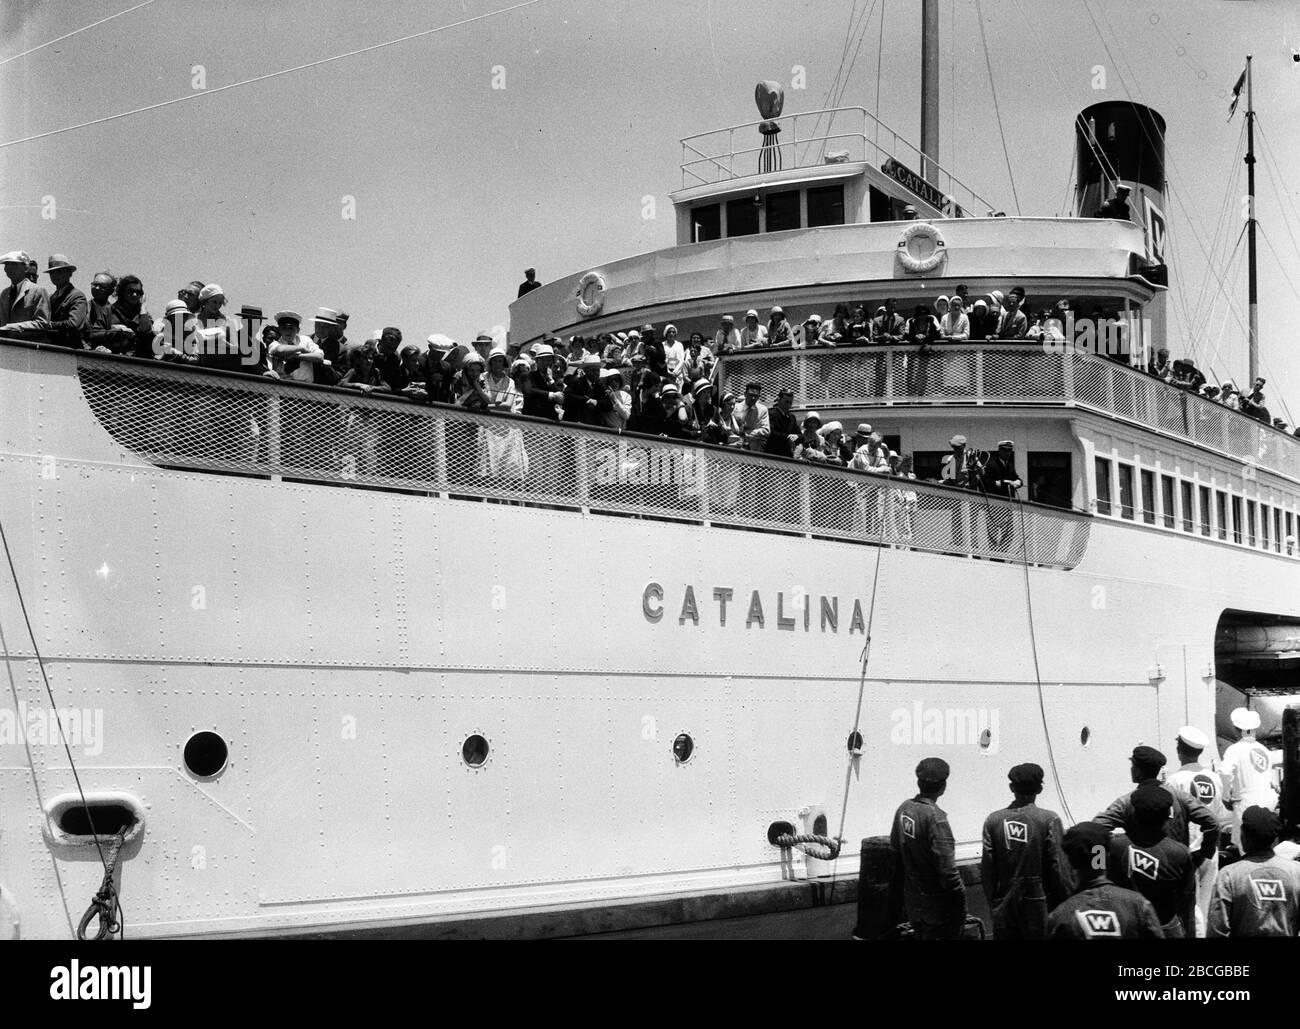 Passengers watch from decks of the SS Catalina, also known as The Great White Steamer, docked in Avalon, Santa Catalina Island, California, 1931. Photography by Burton Holmes. Stock Photo